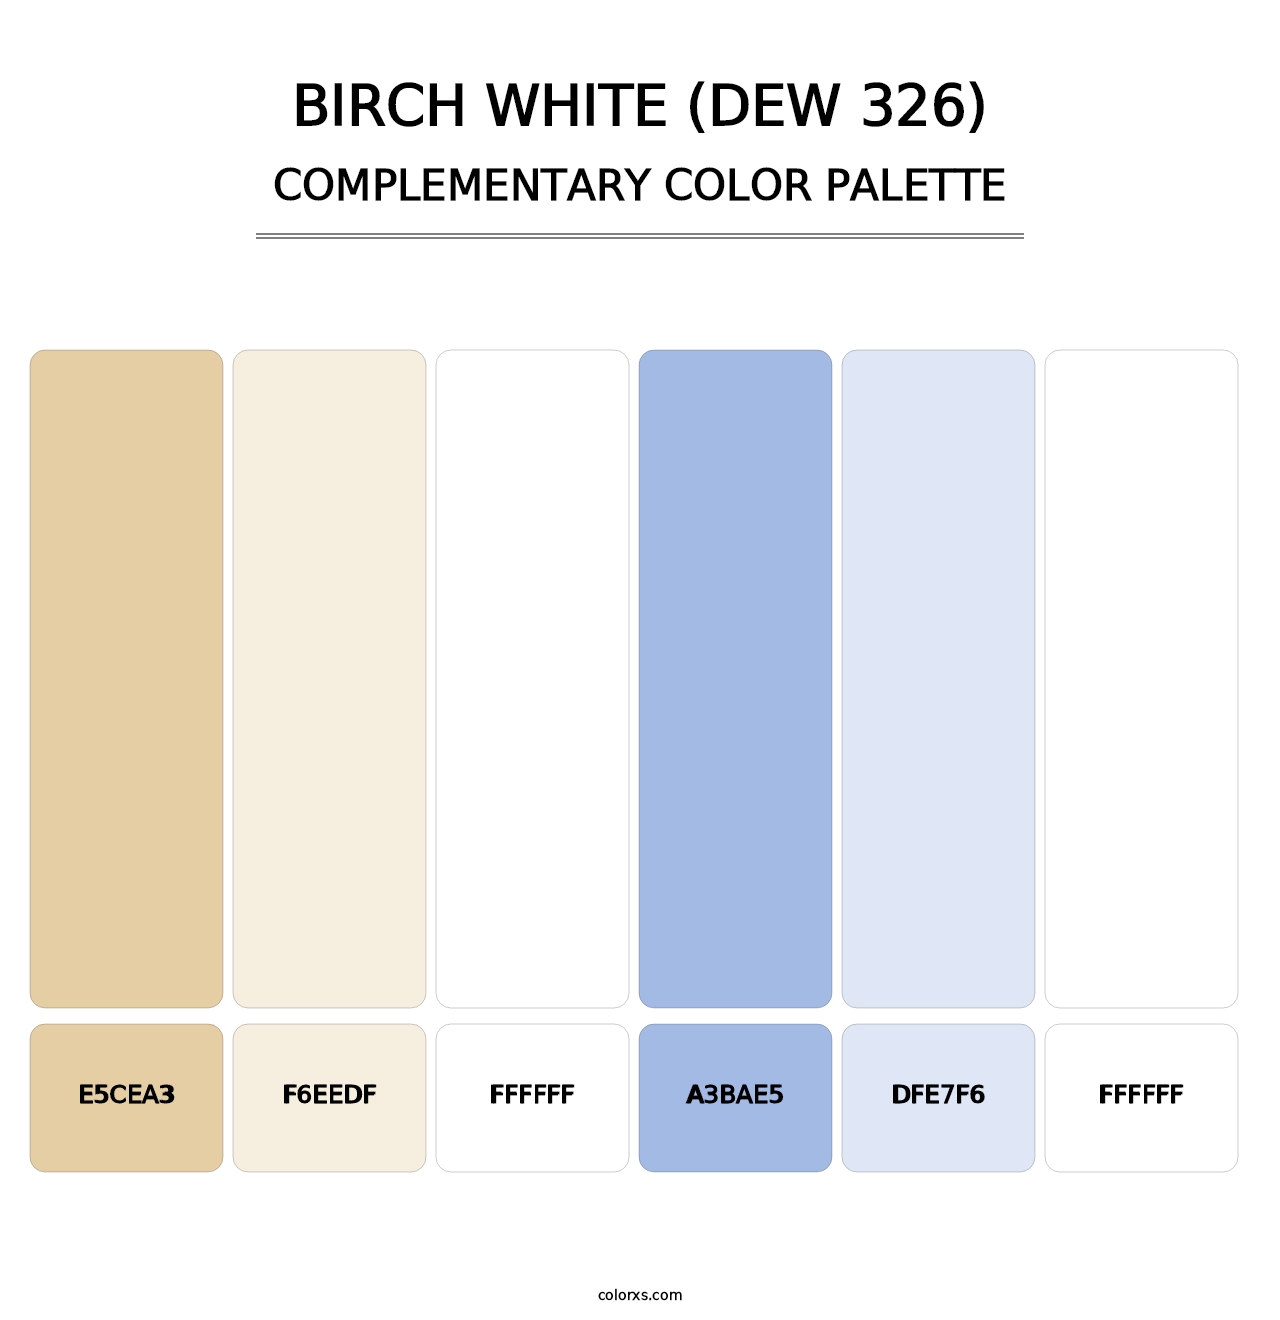 Birch White (DEW 326) - Complementary Color Palette